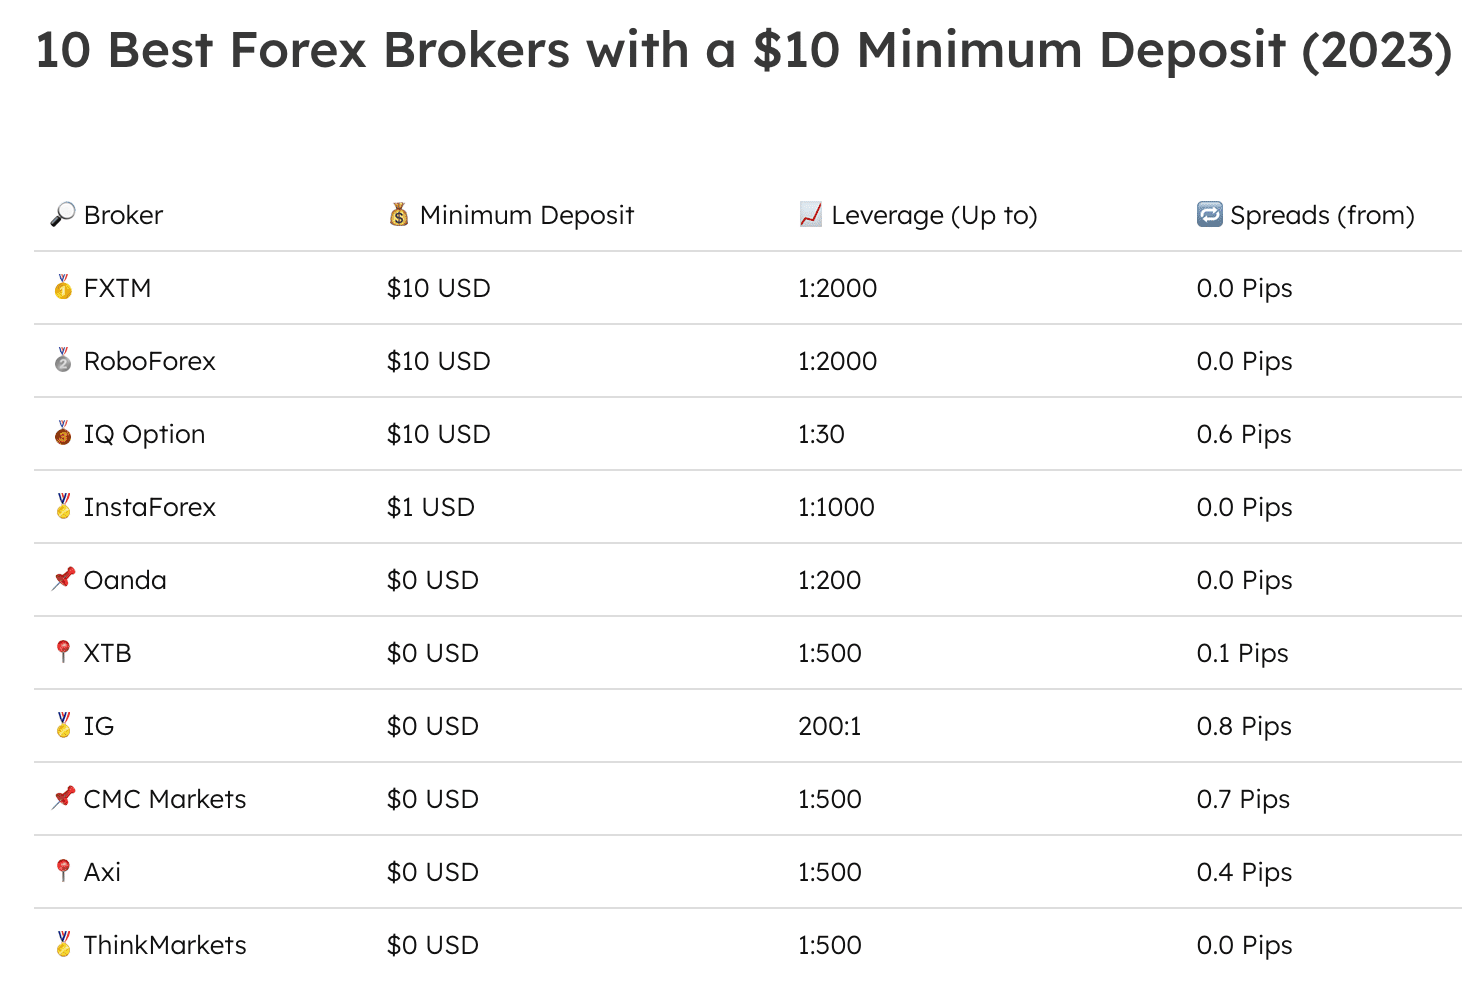 forex brokers with min deposit of $10